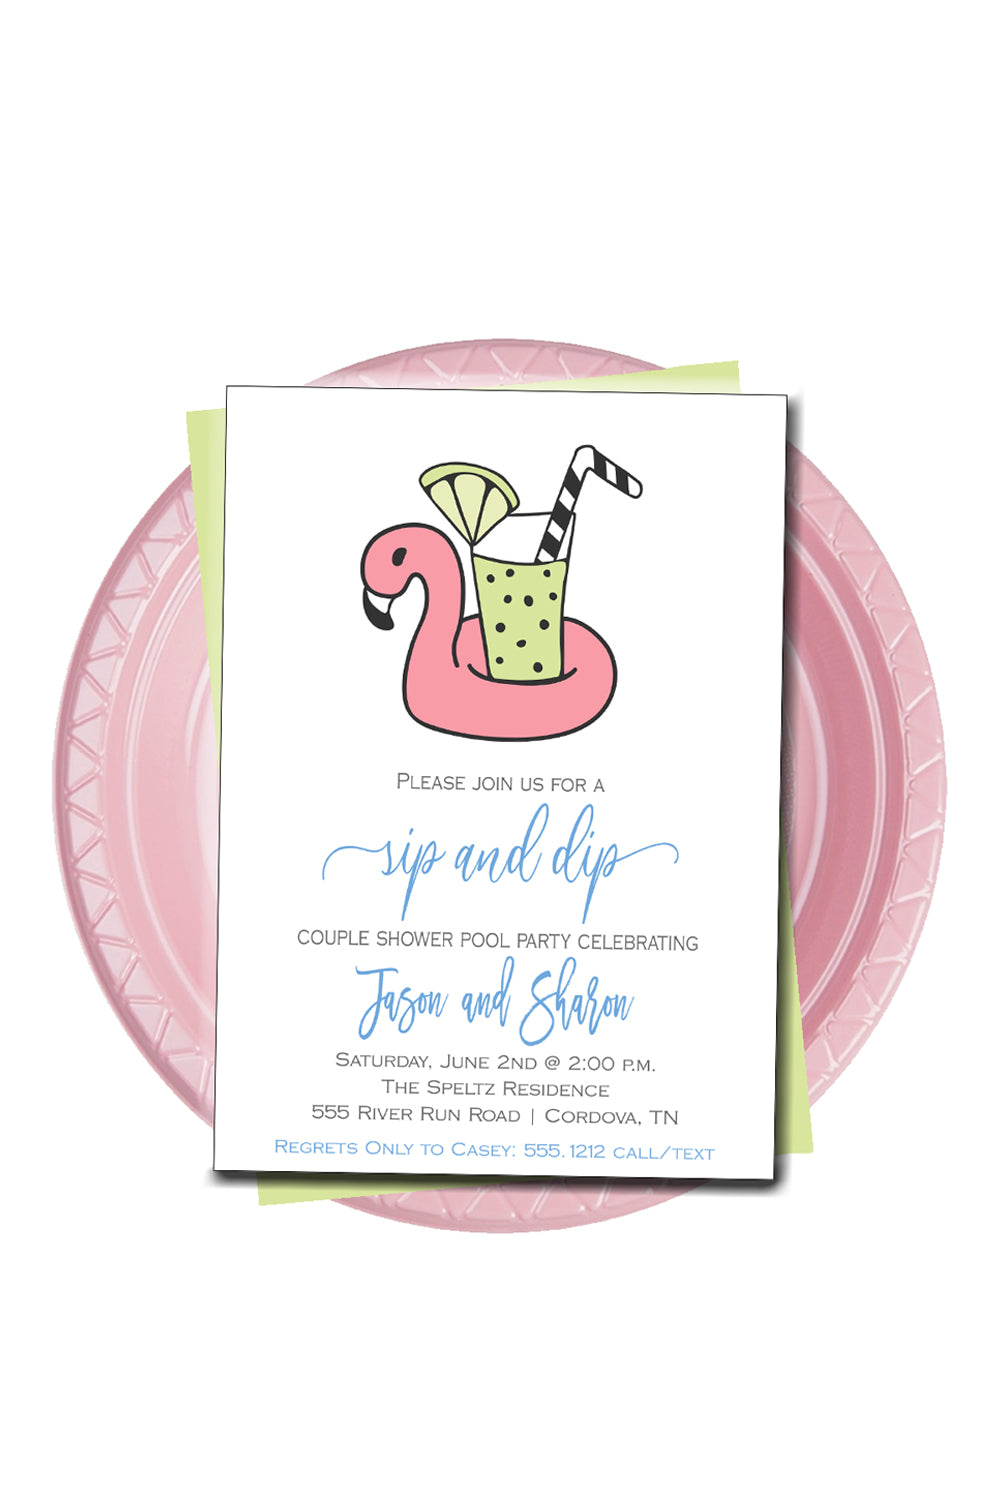 Couples Pool Party Bridal Shower Invitation